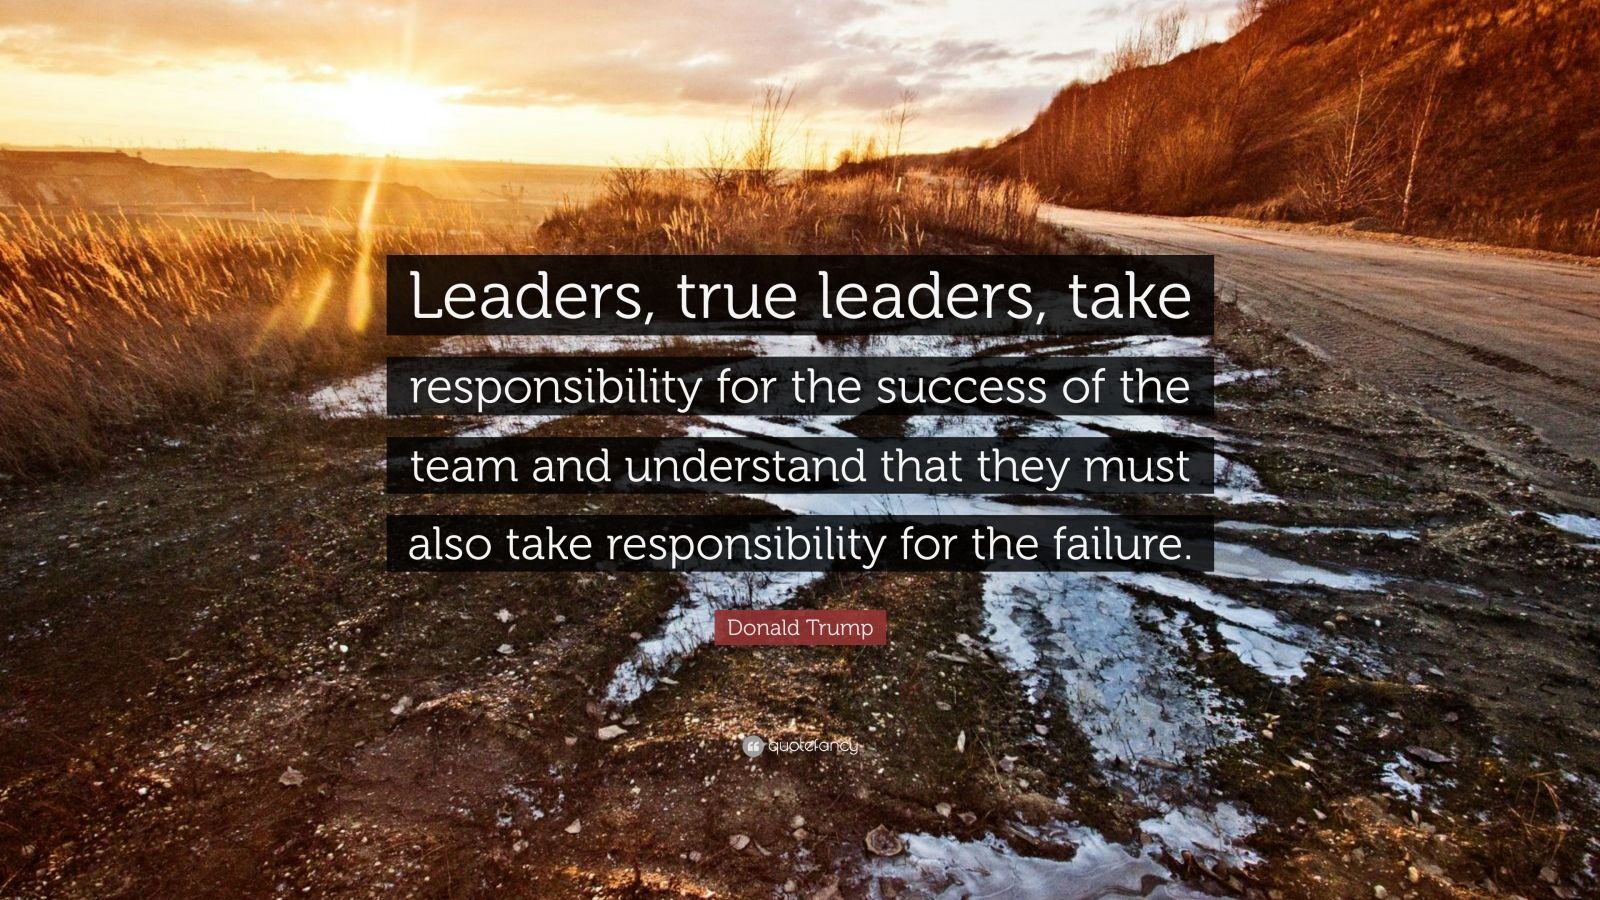 439409 Donald Trump Quote Leaders true leaders take responsibility for